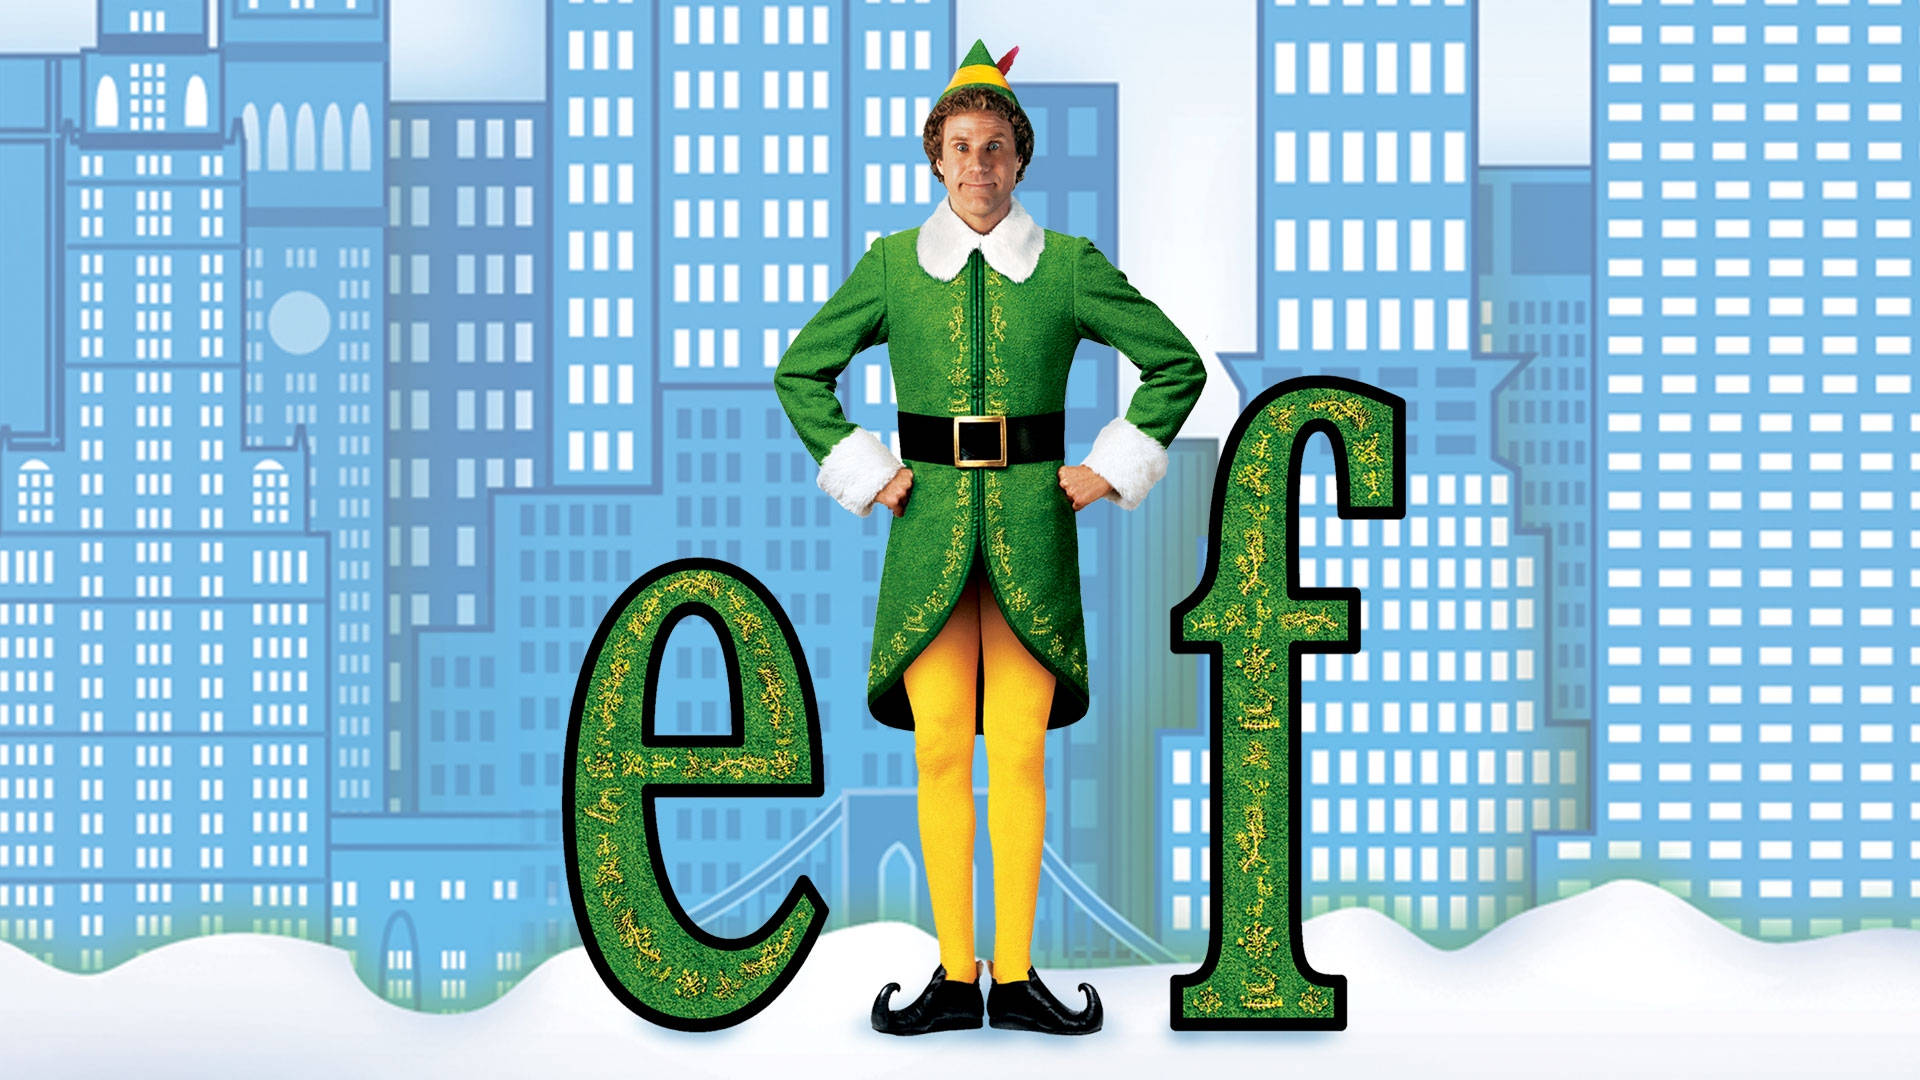 buddy the elf movie poster